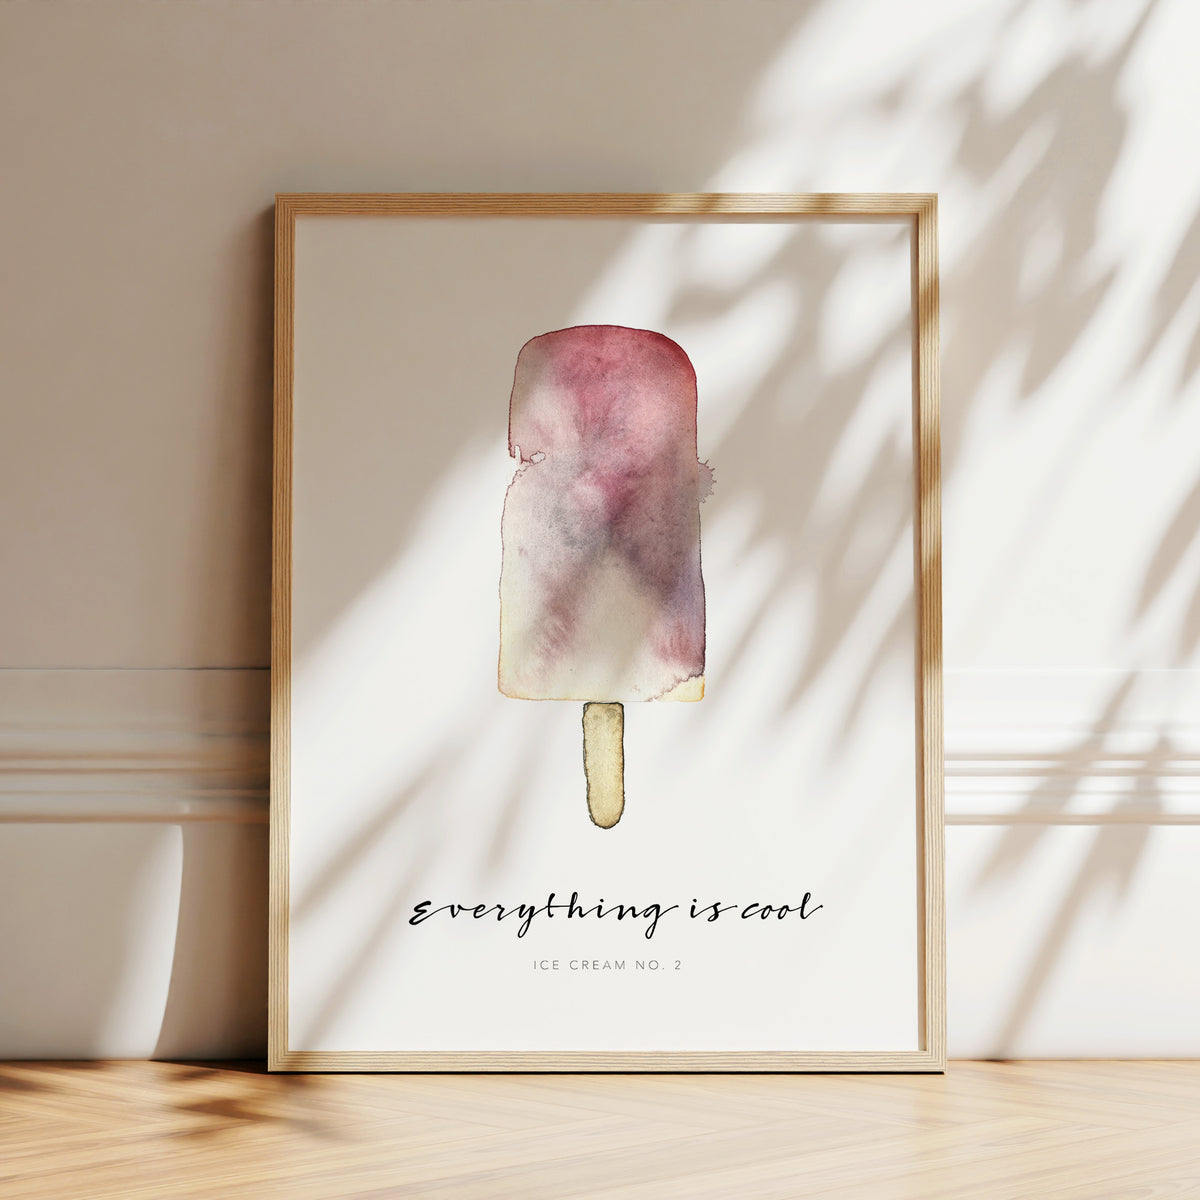 Art Print - Everything is cool | Ice Cream No 2